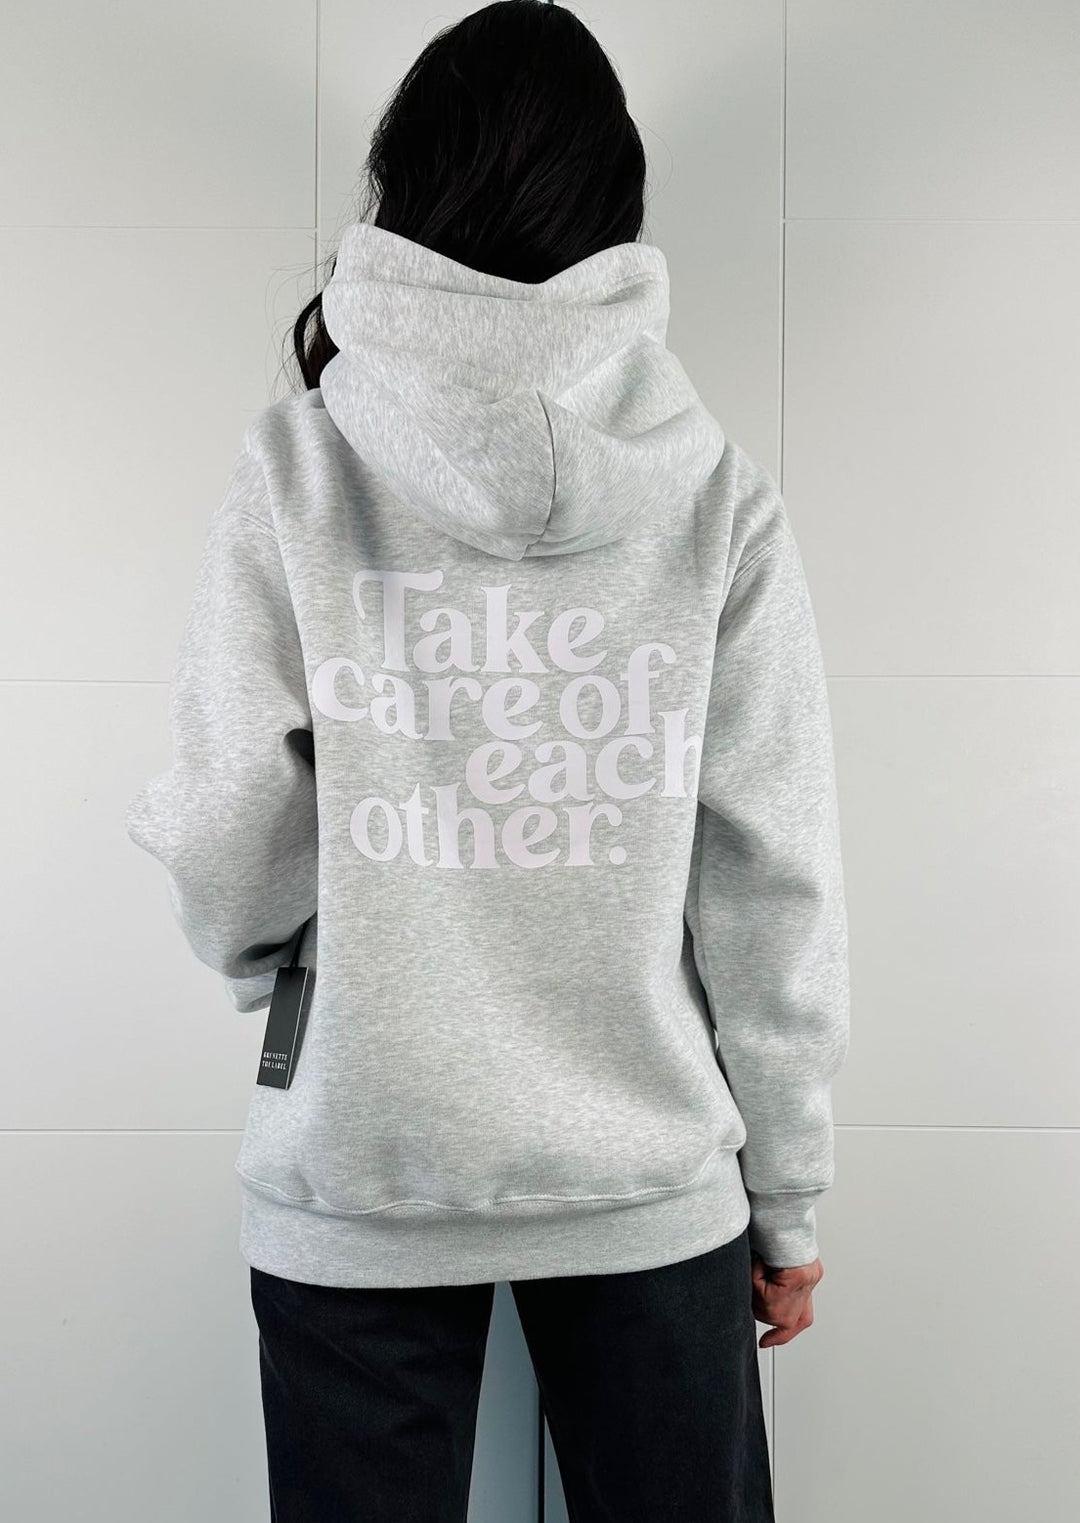 "TAKE CARE OF EACH OTHER" CLASSIC PEBBLE GREY HOODIE